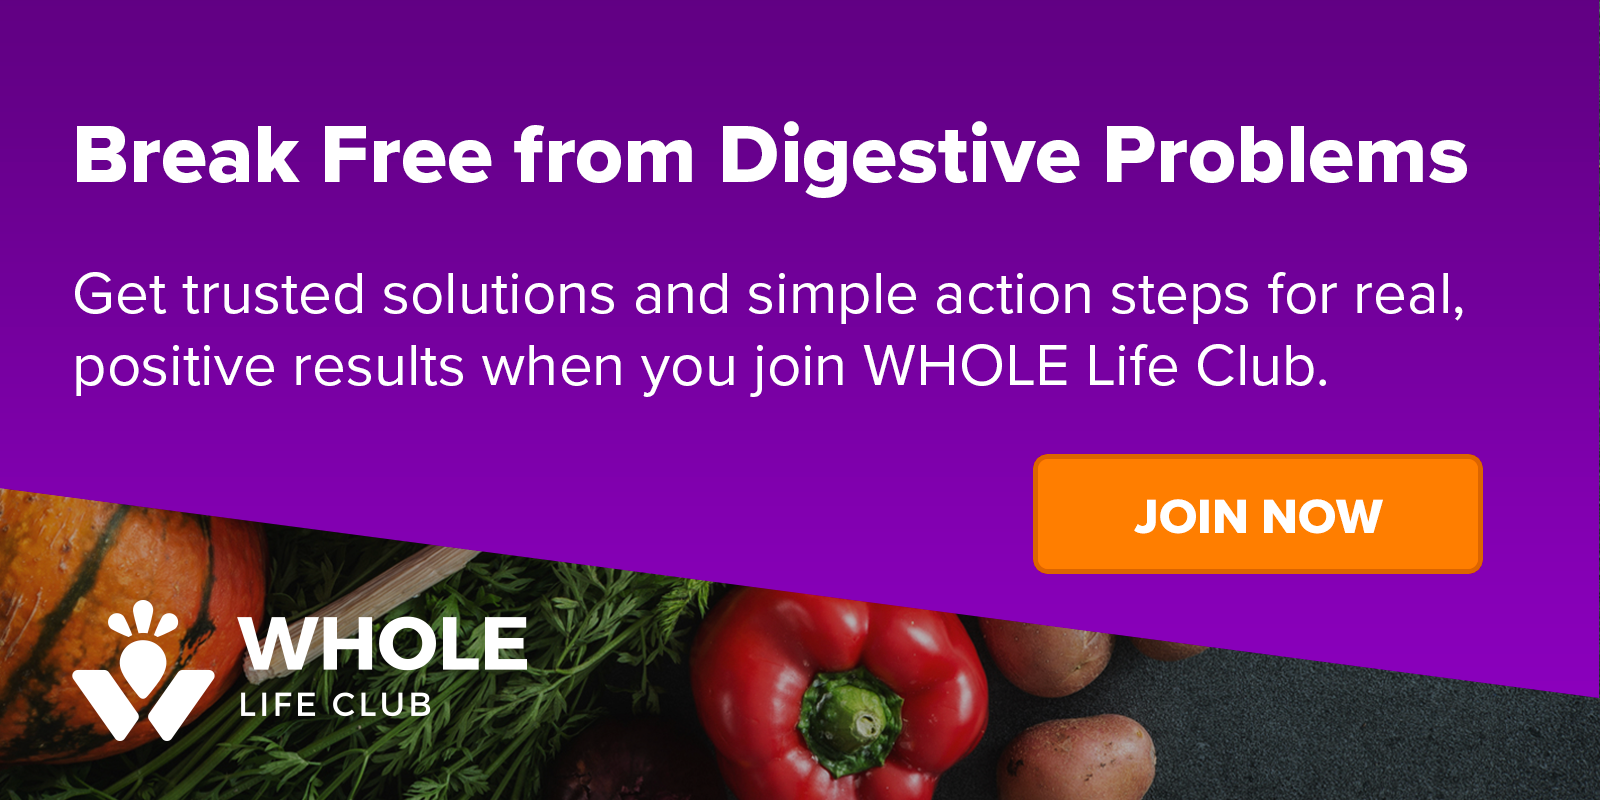 Break Free from Digestive Problems - Join WHOLE Life Club!